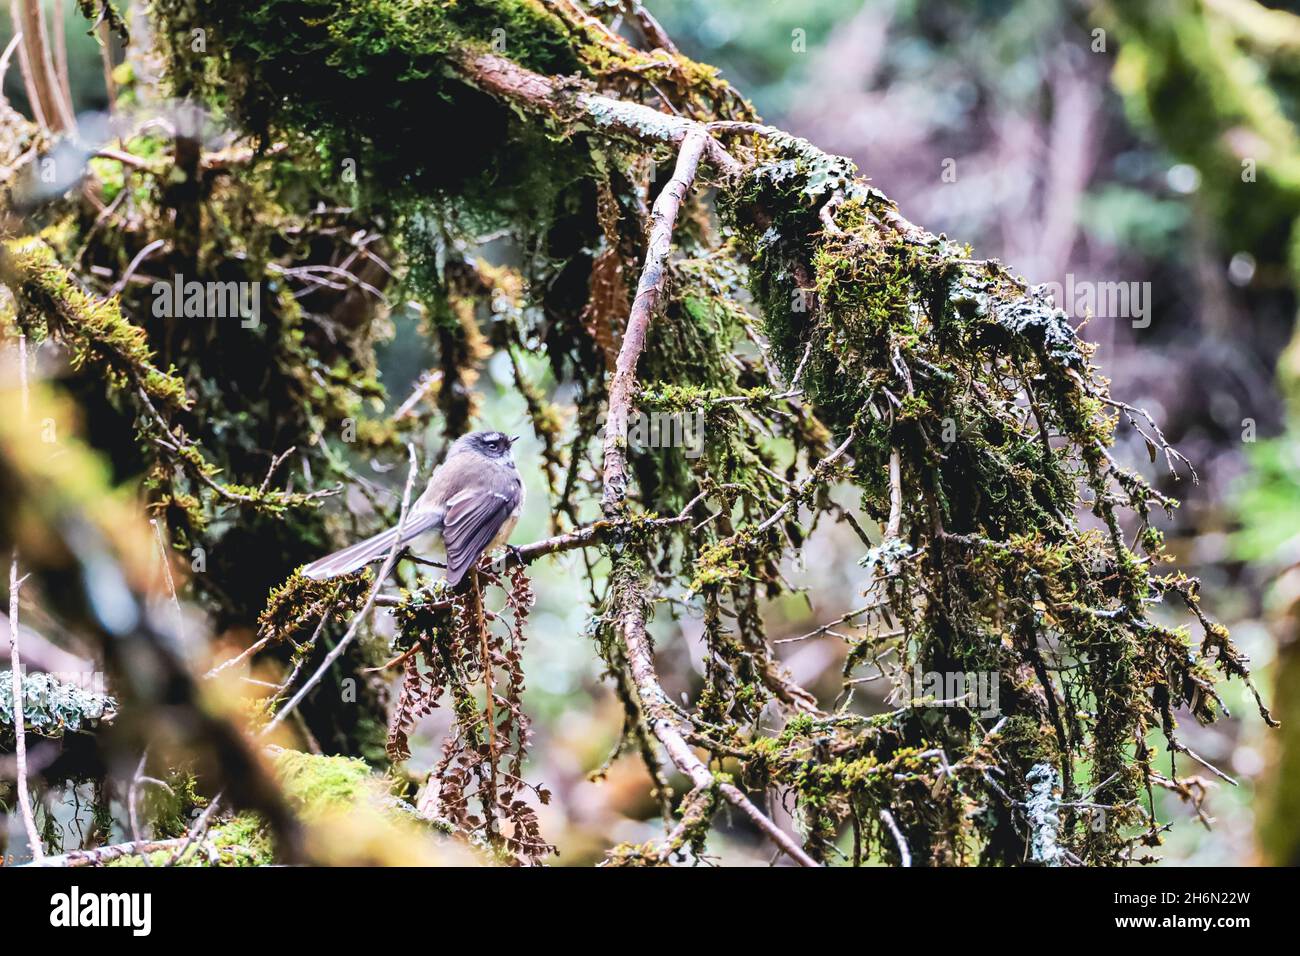 Fantail bird in the forest Stock Photo